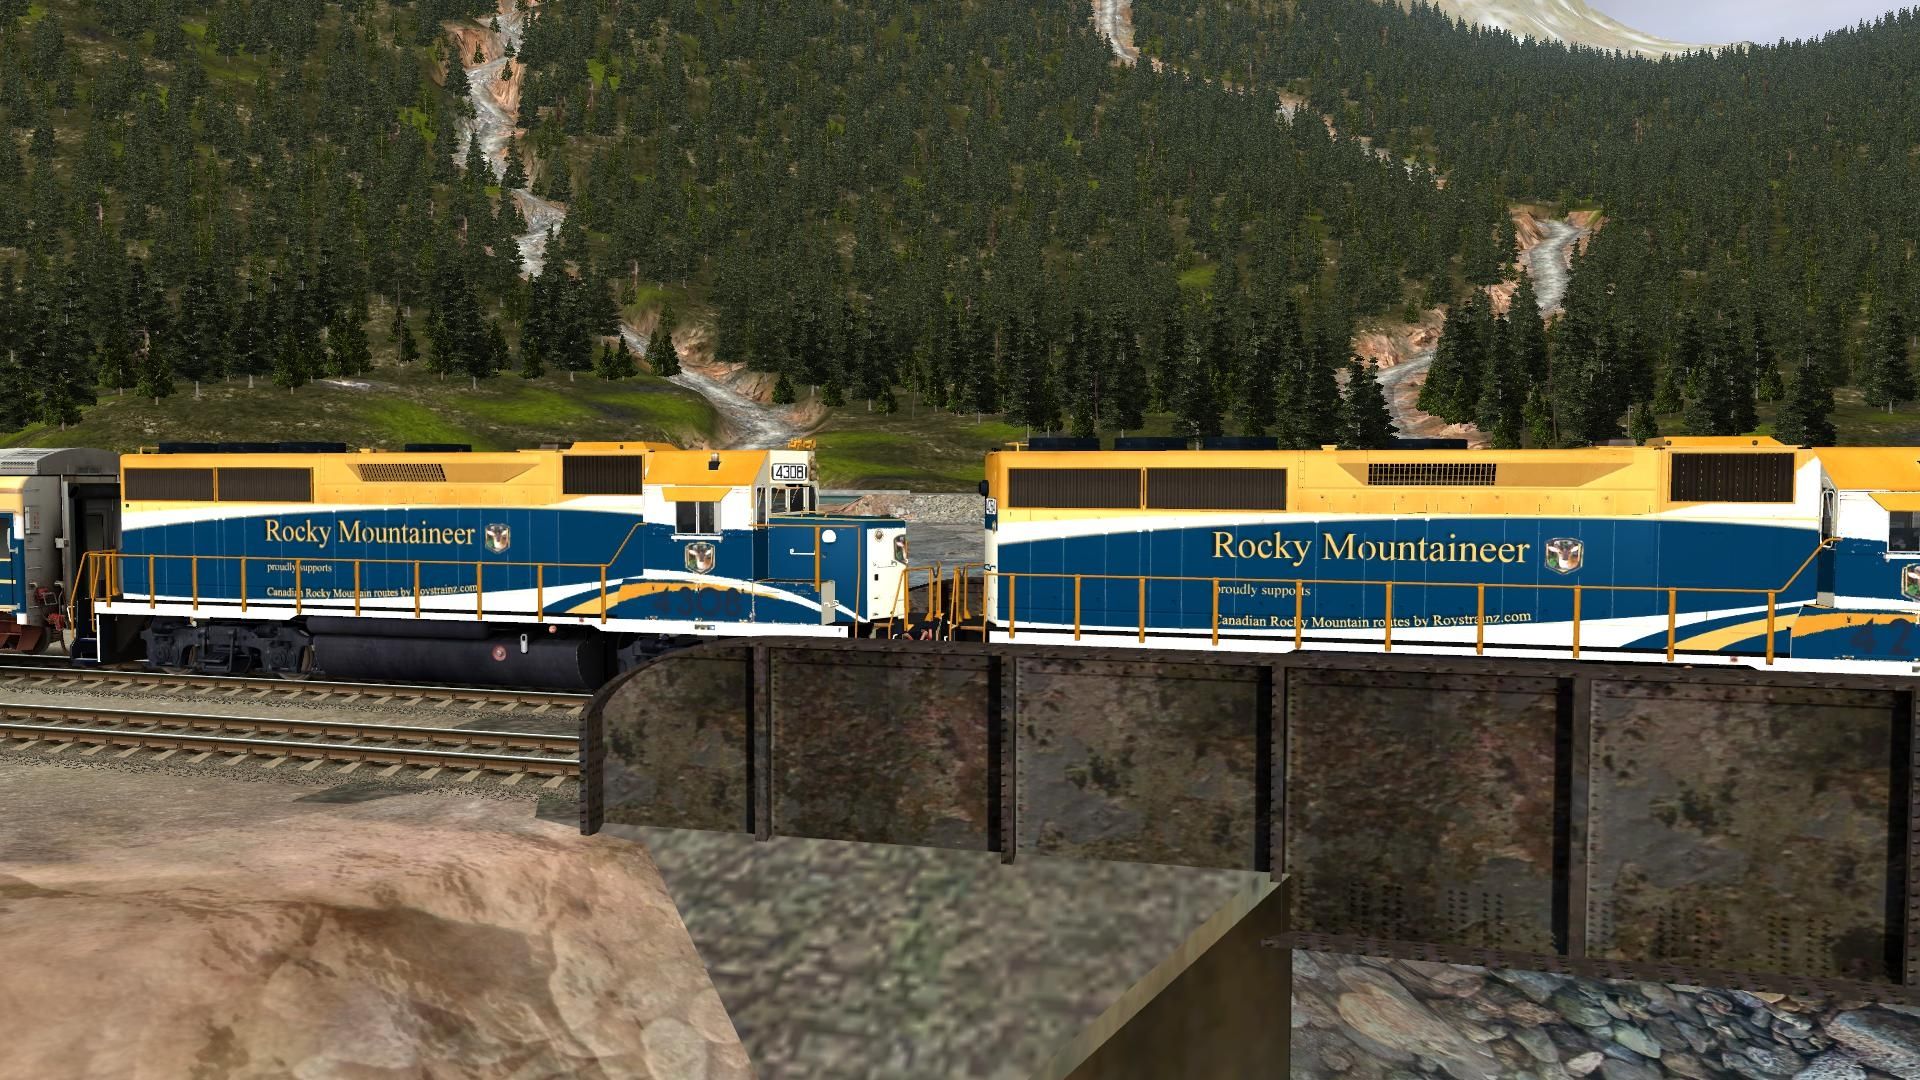 Rocky-Mountaineer-anno-2013-2014.jpg